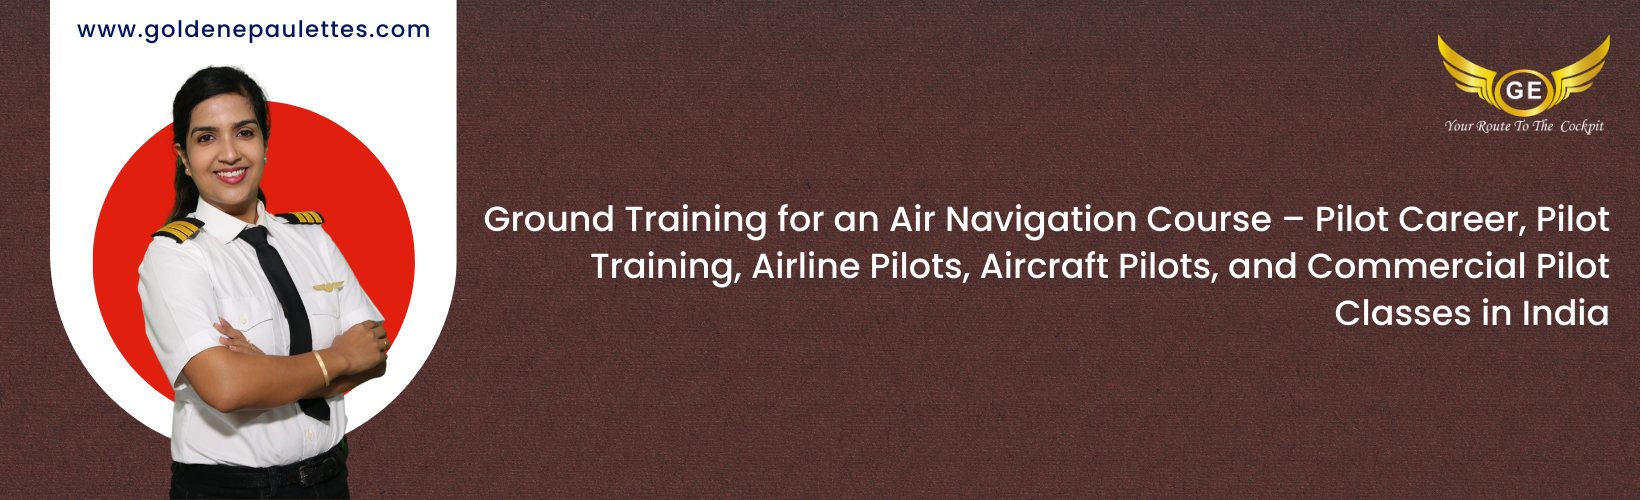 Finding an Experienced Air Navigation Course Instructor